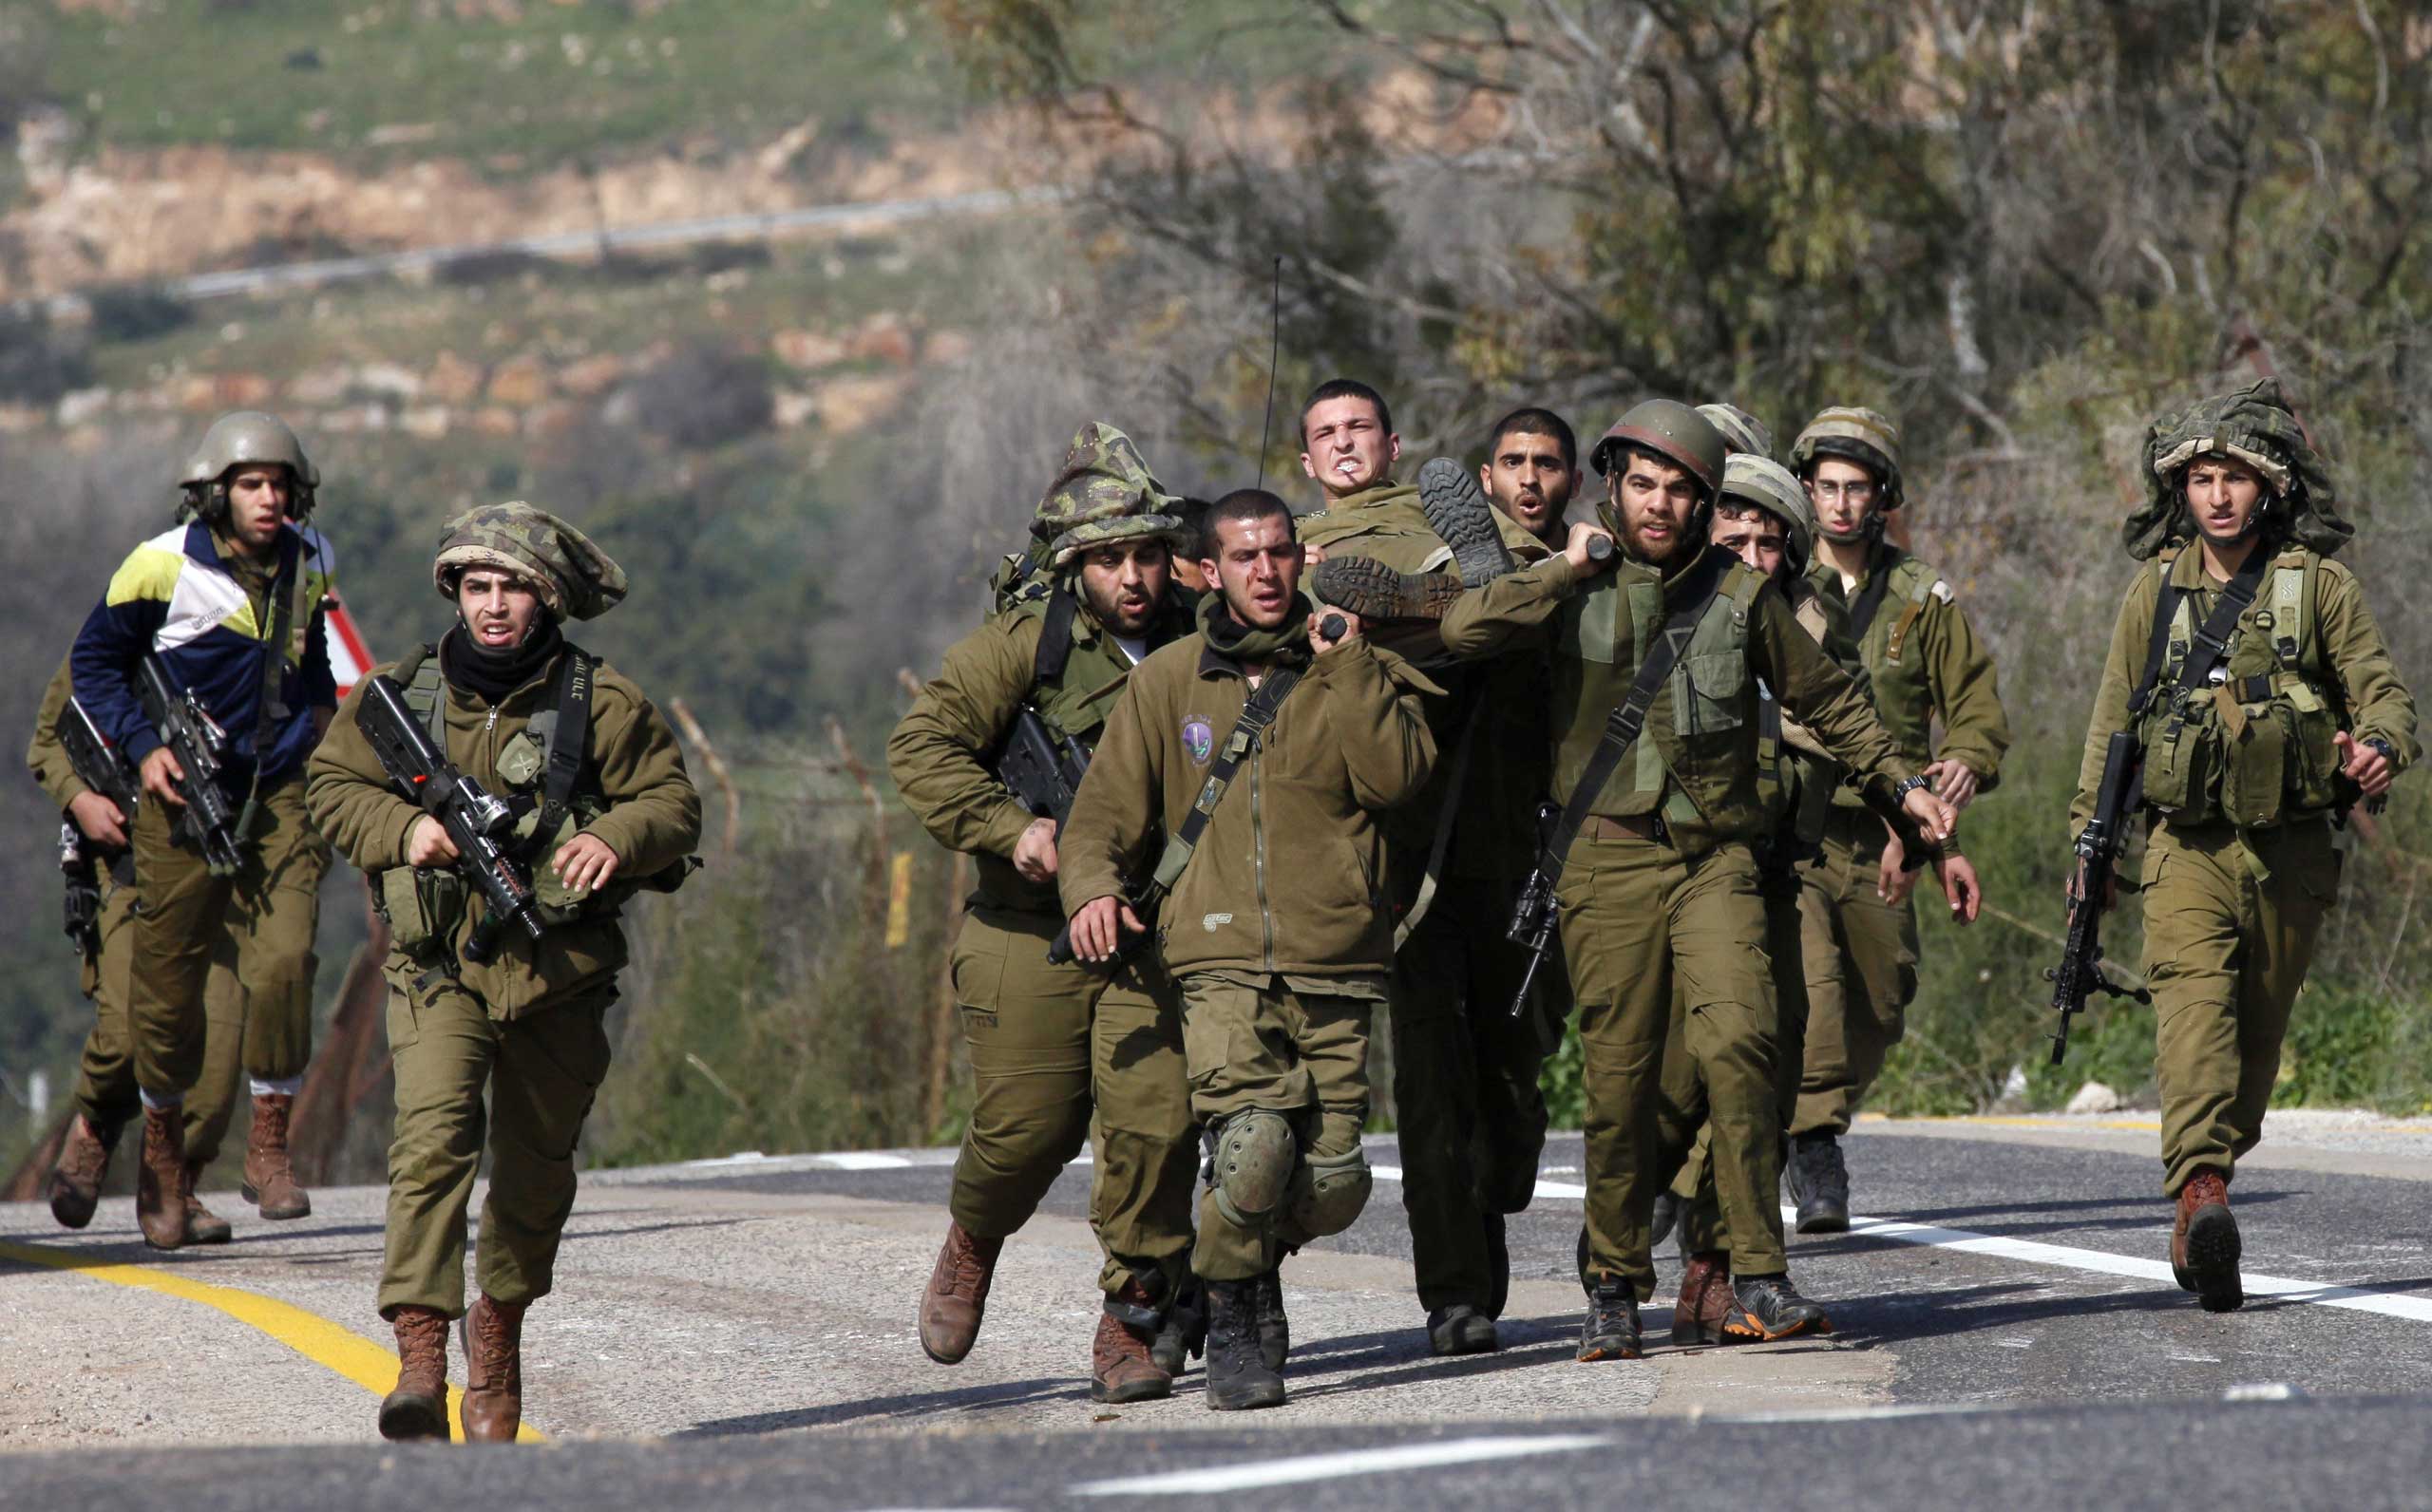 Israeli soldiers carry an injured comrade after an anti-tank missile hit an army vehicle in an occupied area on the border with Lebanon on Jan. 28, 2015. (Jalaa Marey—AFP/Getty Images)